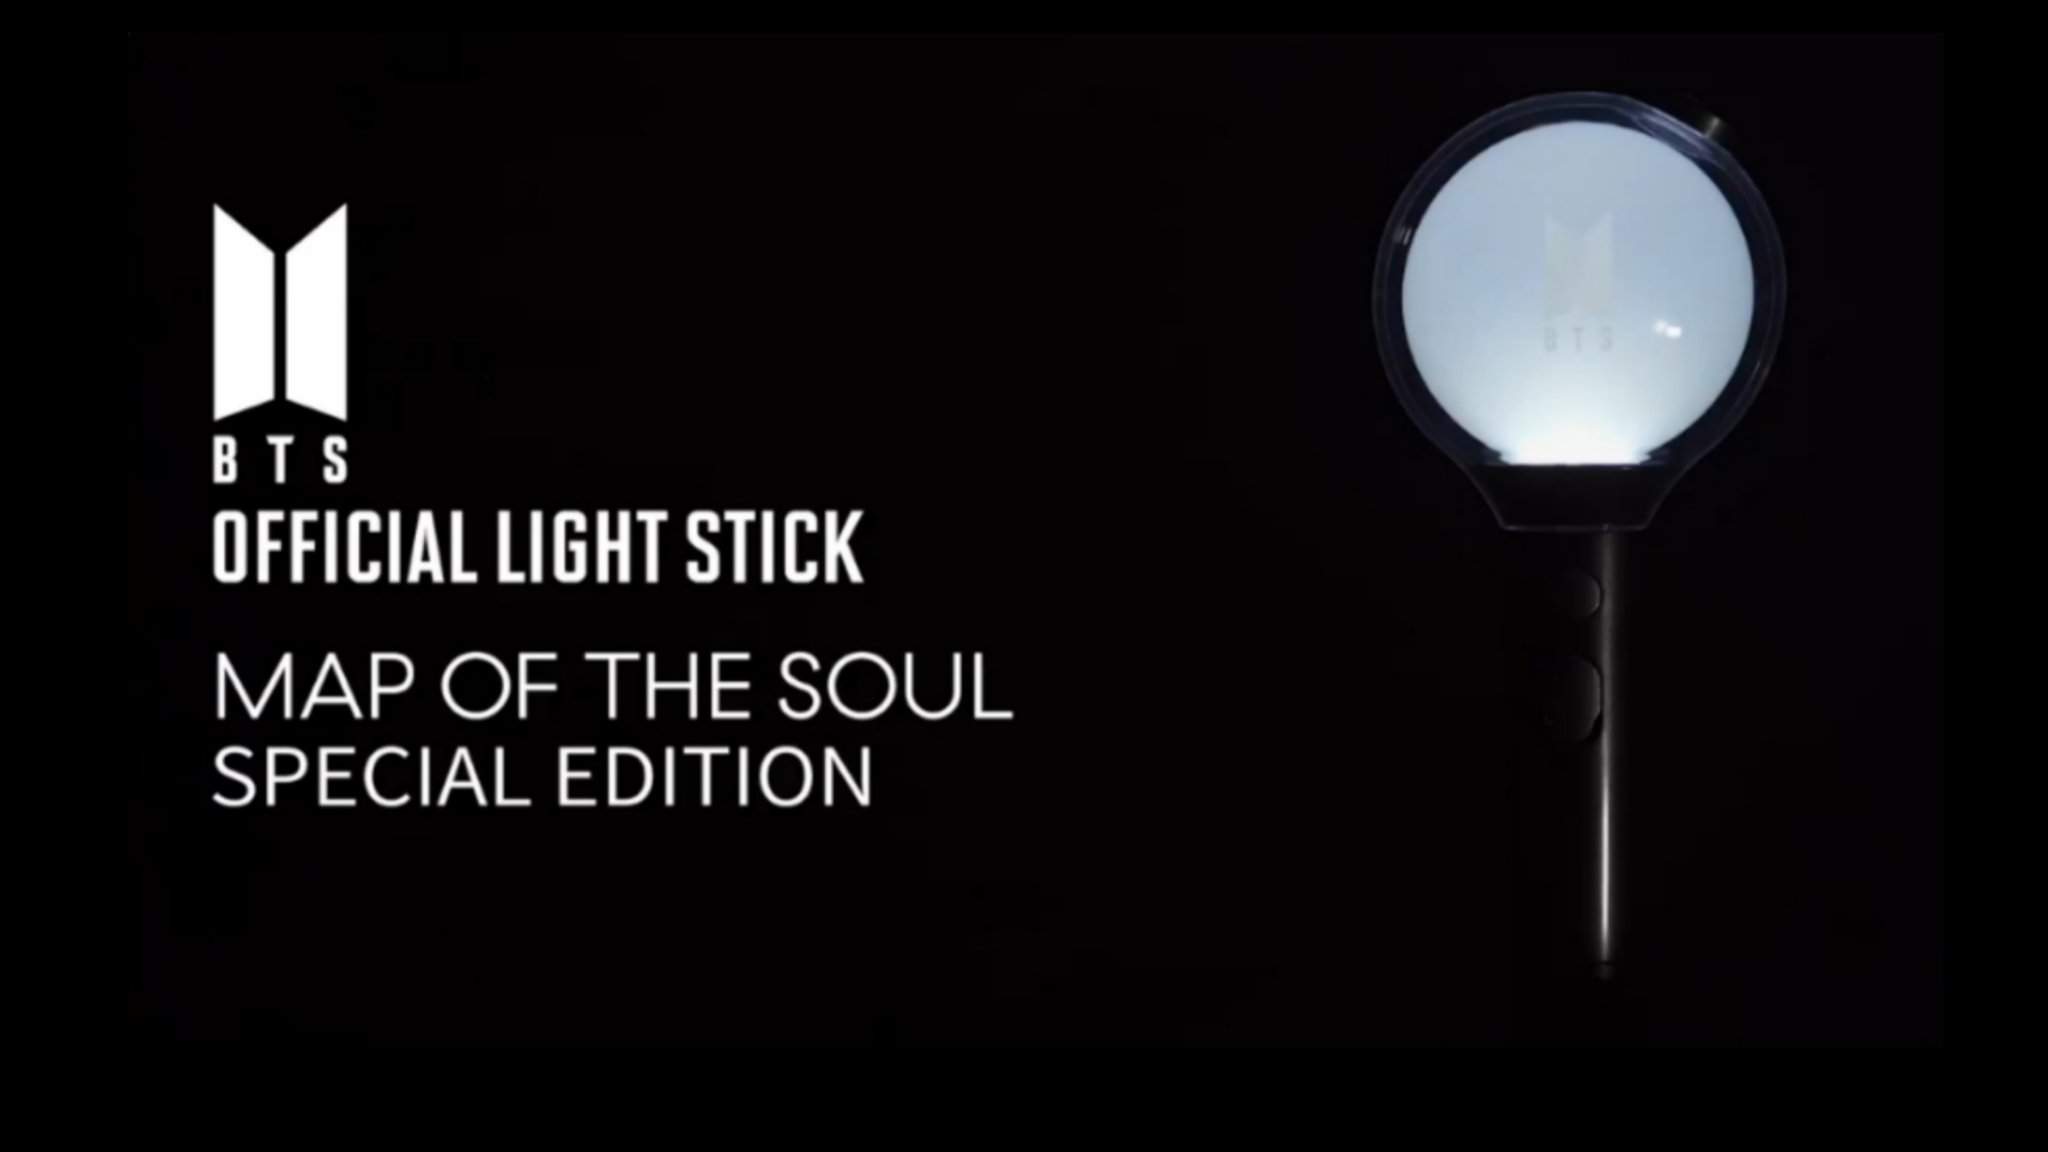 News: BTS To Release Special “Map Of The Soul” Edition Of Official Light Stick. J Hope Amino